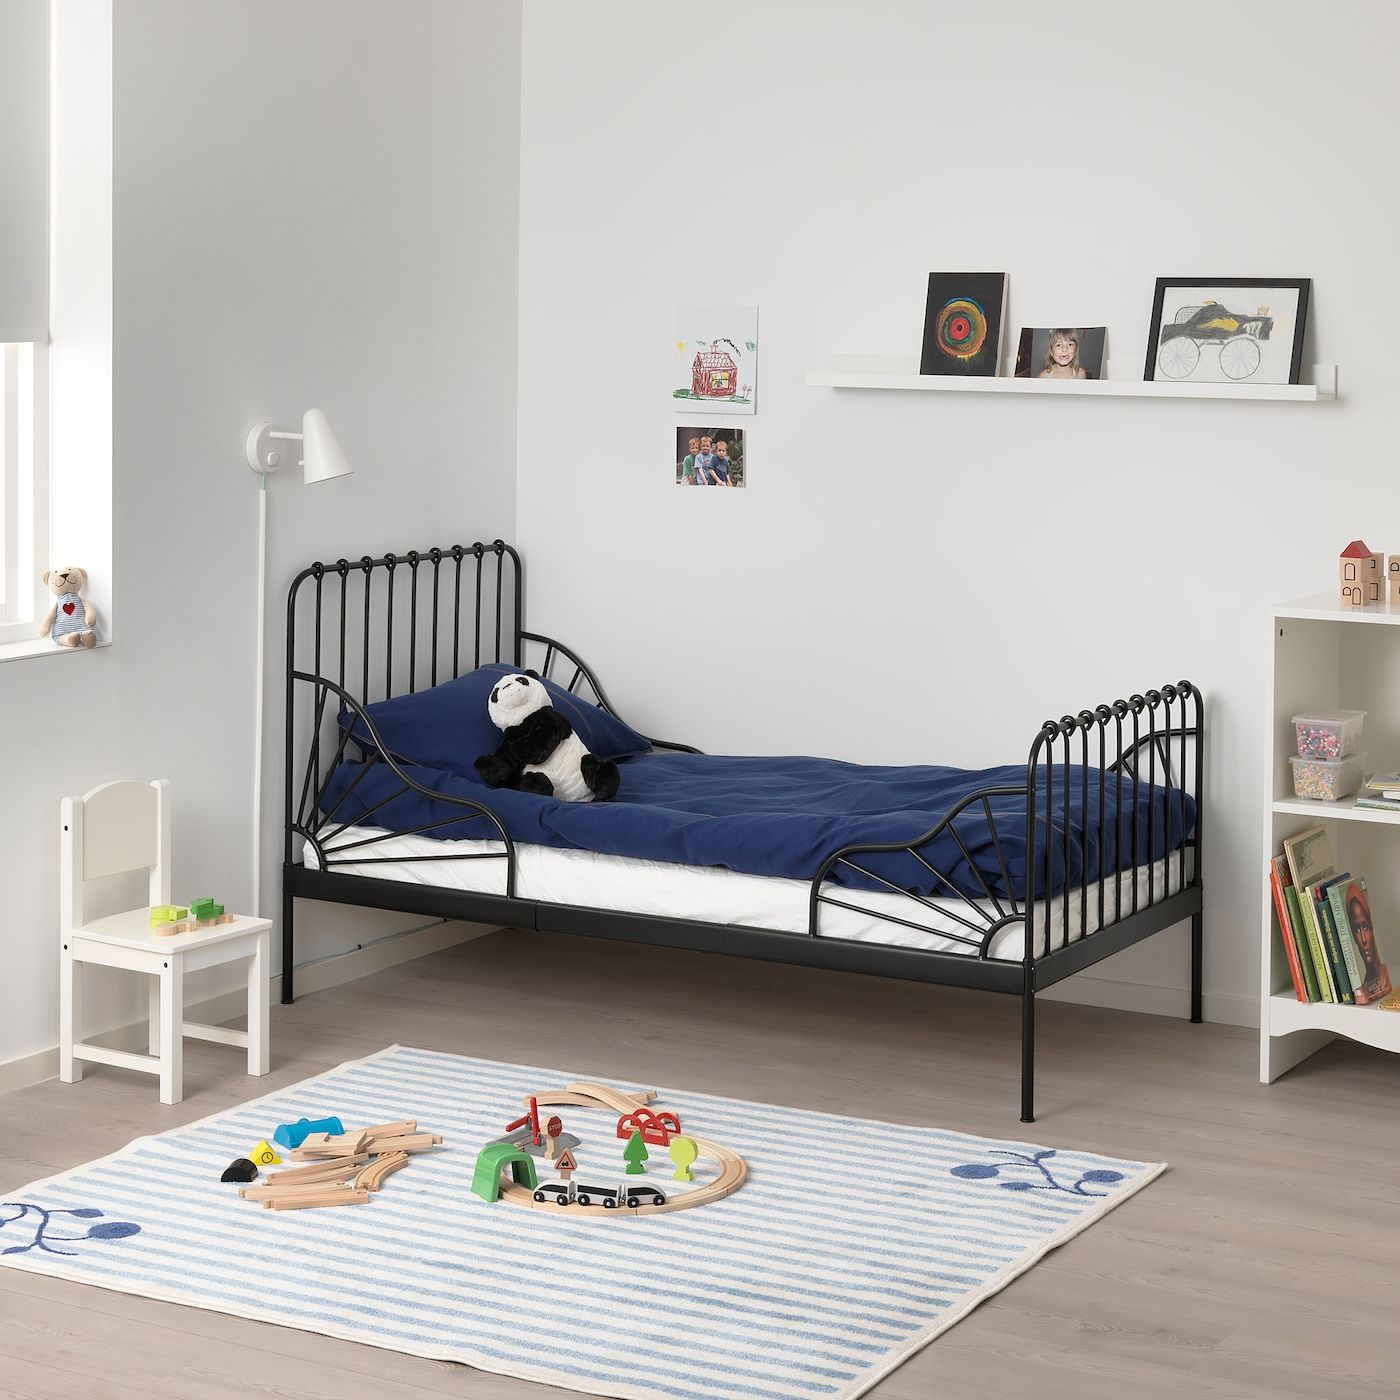 MINNEN Ext bed frame with slatted bed base - black 38 1 ...